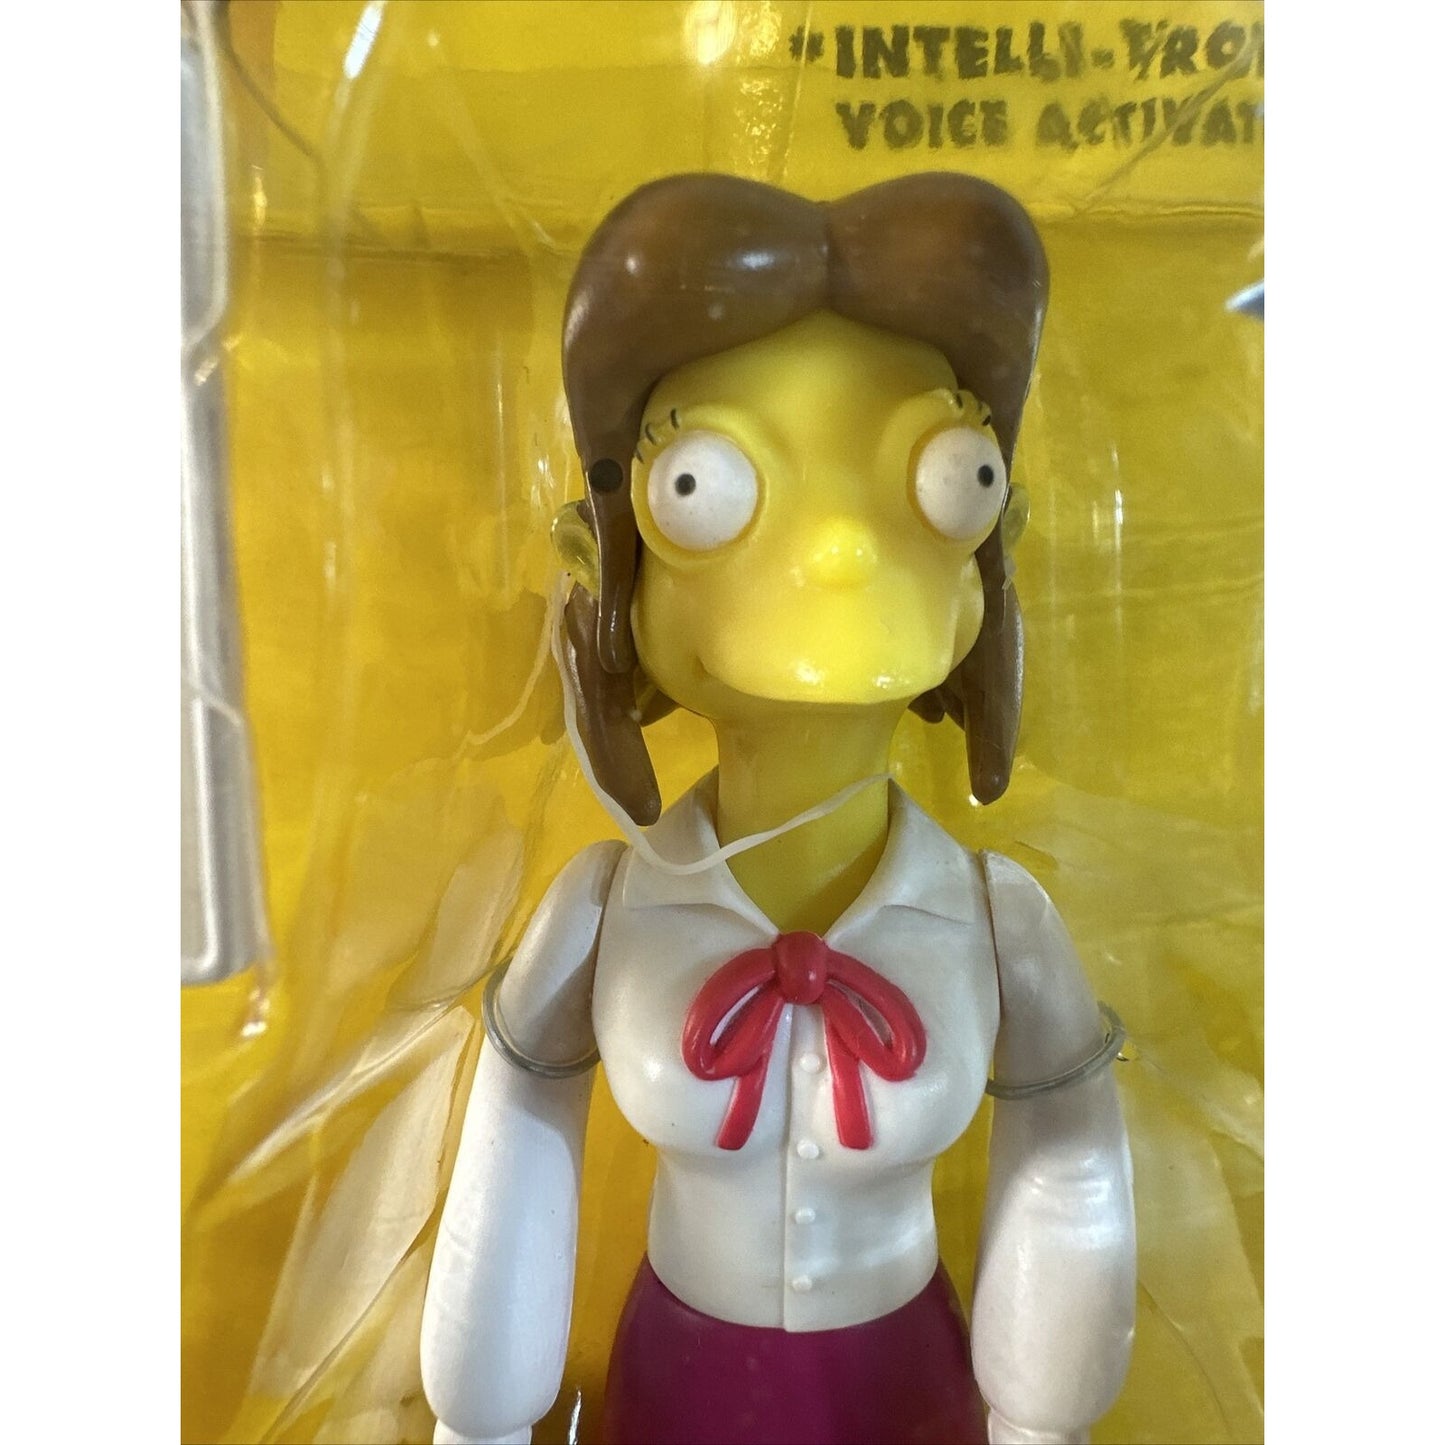 The Simpsons Miss Hoover Series 14 World of Springfield Action Figure Playmates